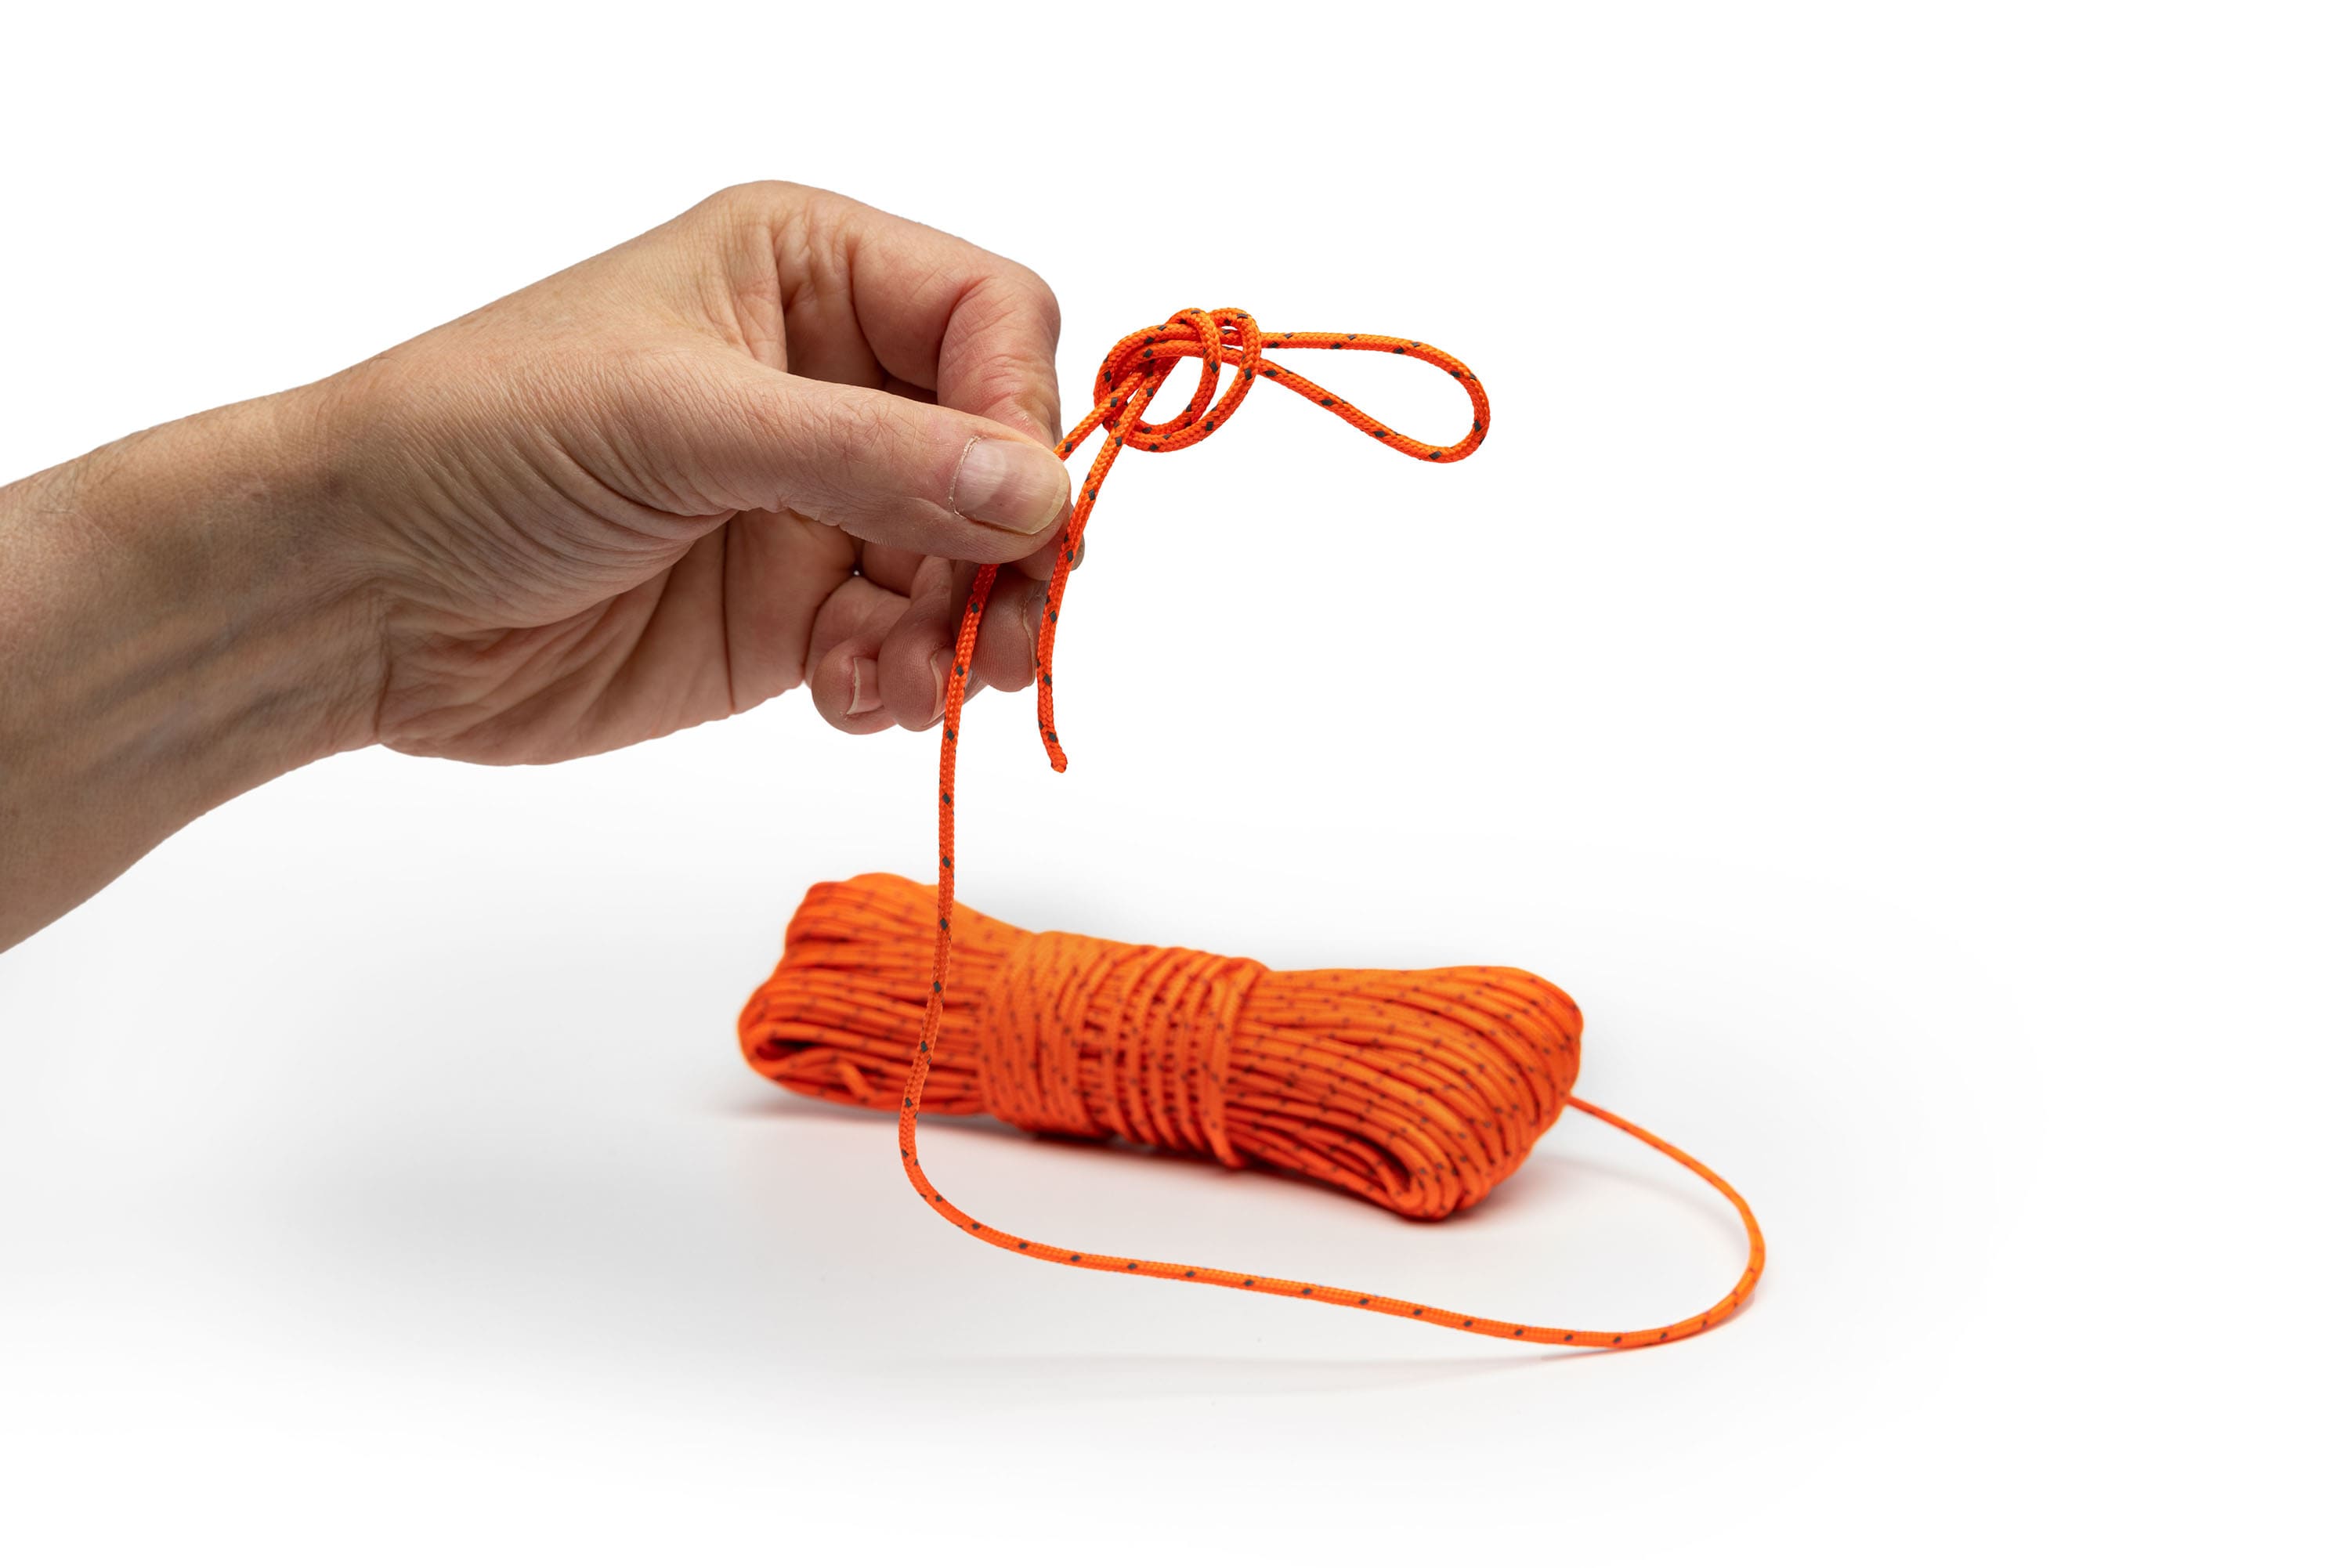 SOL Utility Reflective Tinder Cord - 100 ft